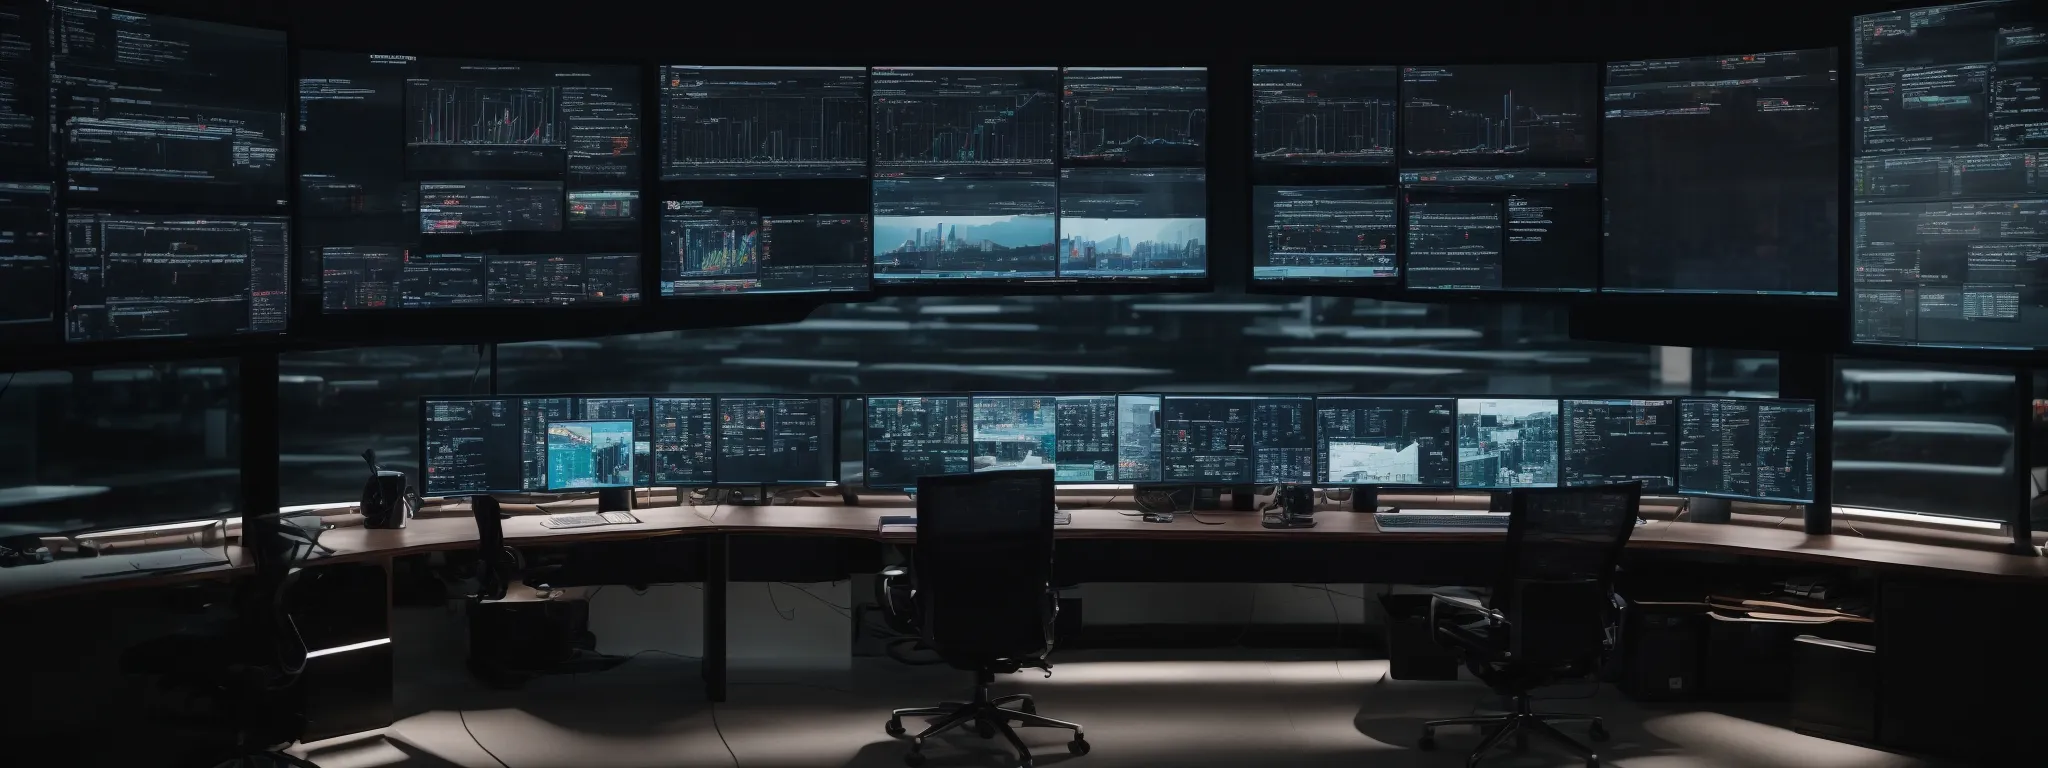 a sleek command center with multiple screens displaying code and analytics, highlighting a focus on website performance and optimization.